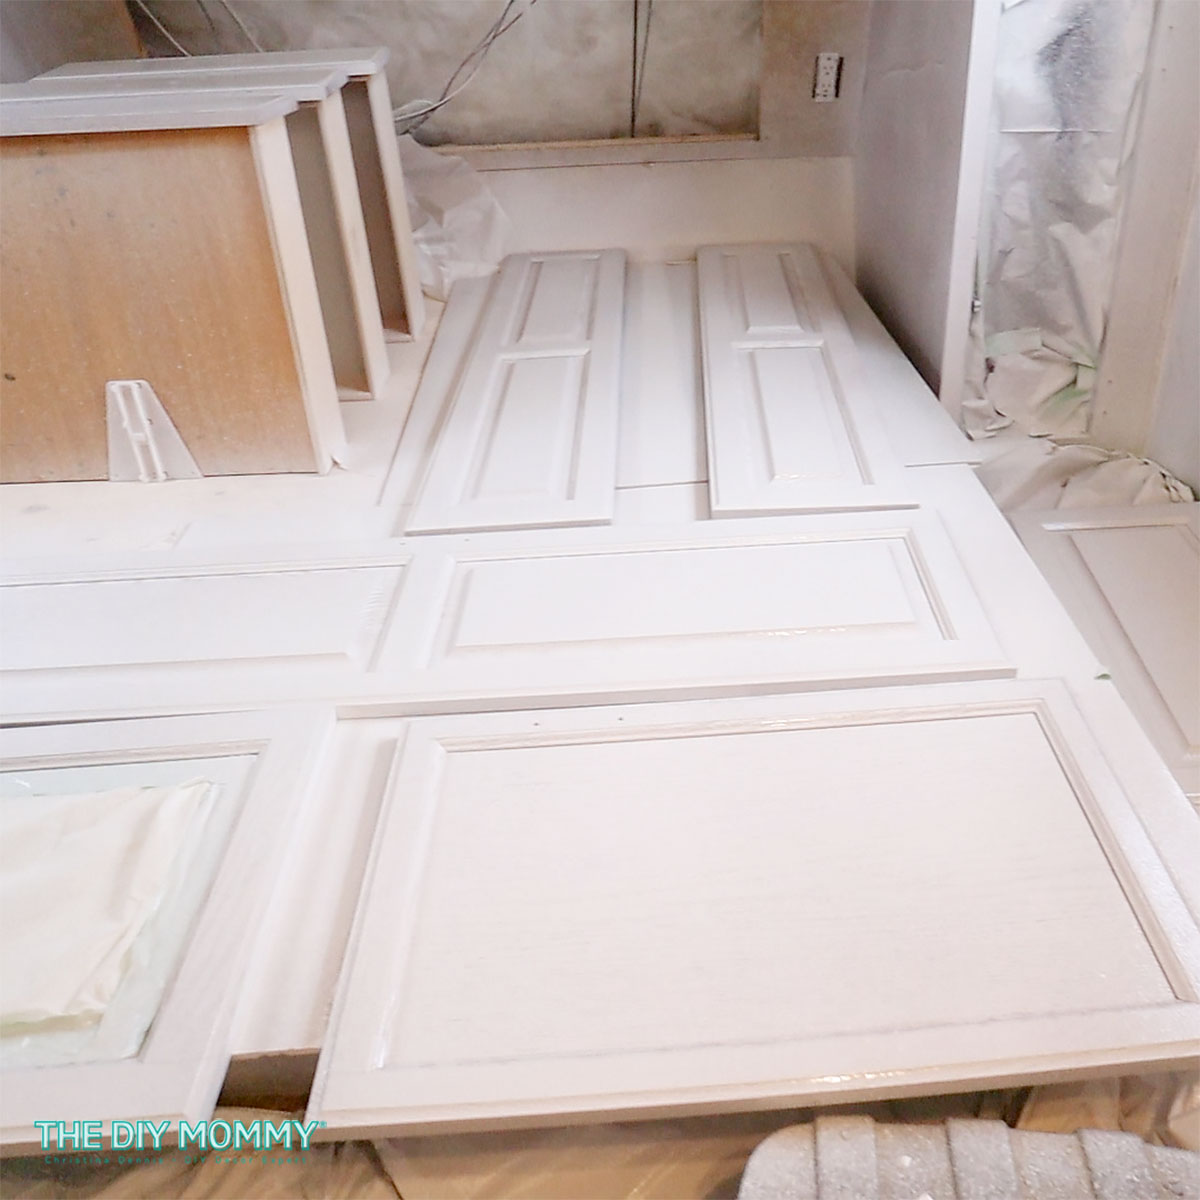 How to paint kitchen cabinets without sanding (easy!)